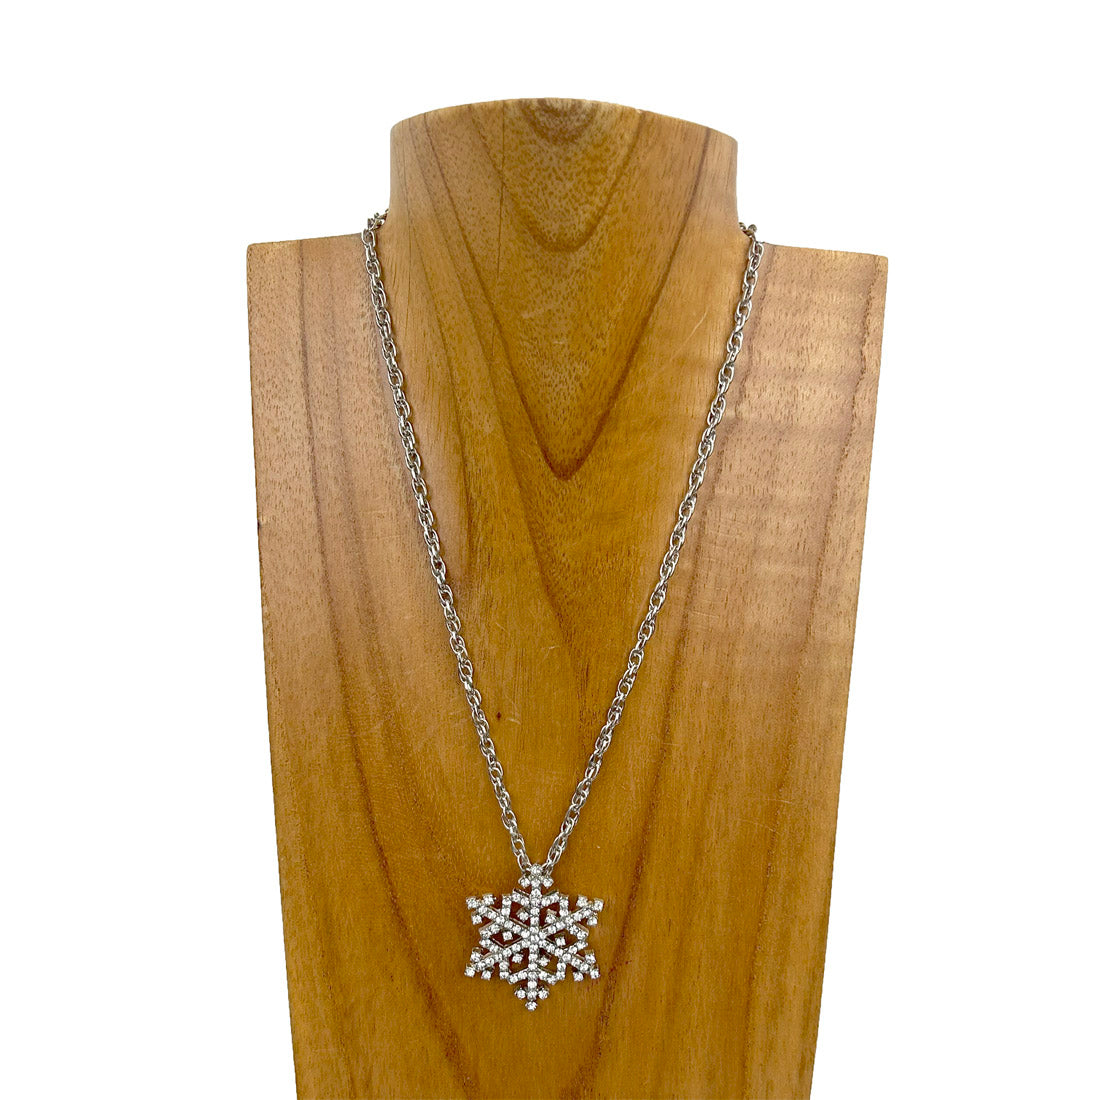 NKS231028-57            Silver metal chain with clear crystal snowflake pendent Necklace